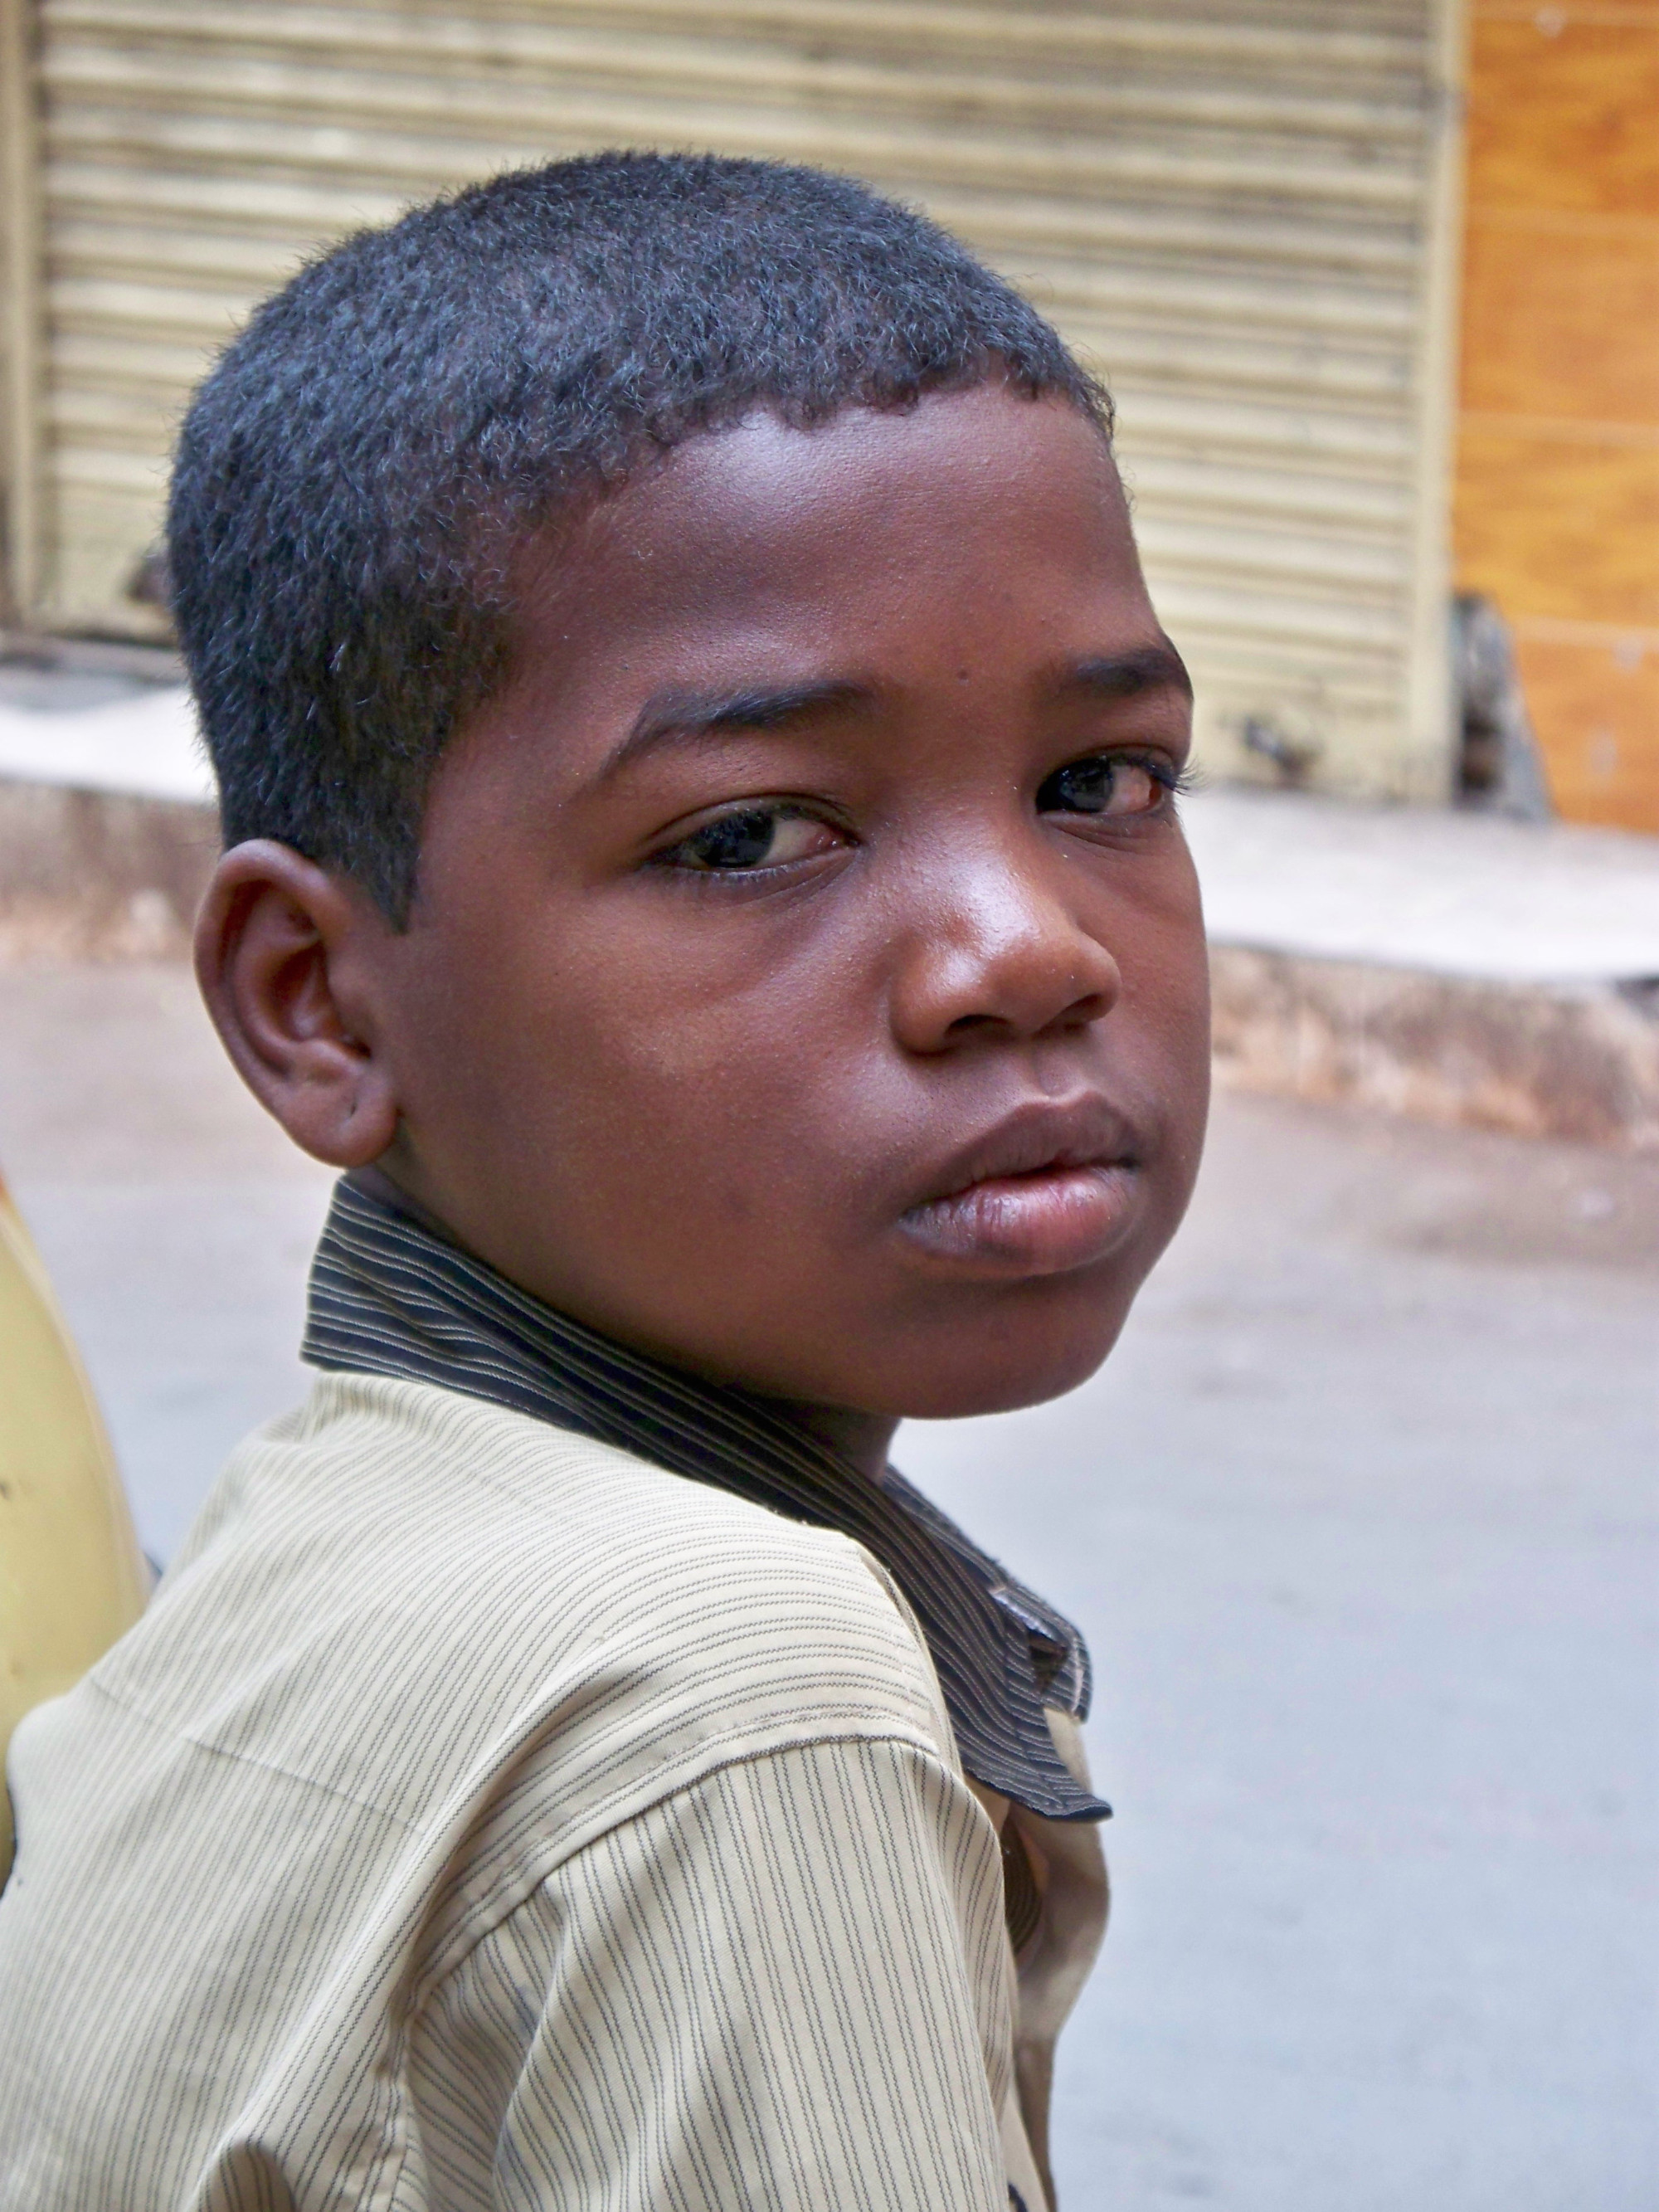 young representative of Siddis, India's Lost African Tribe (Junagadh, Gujarat state, India)